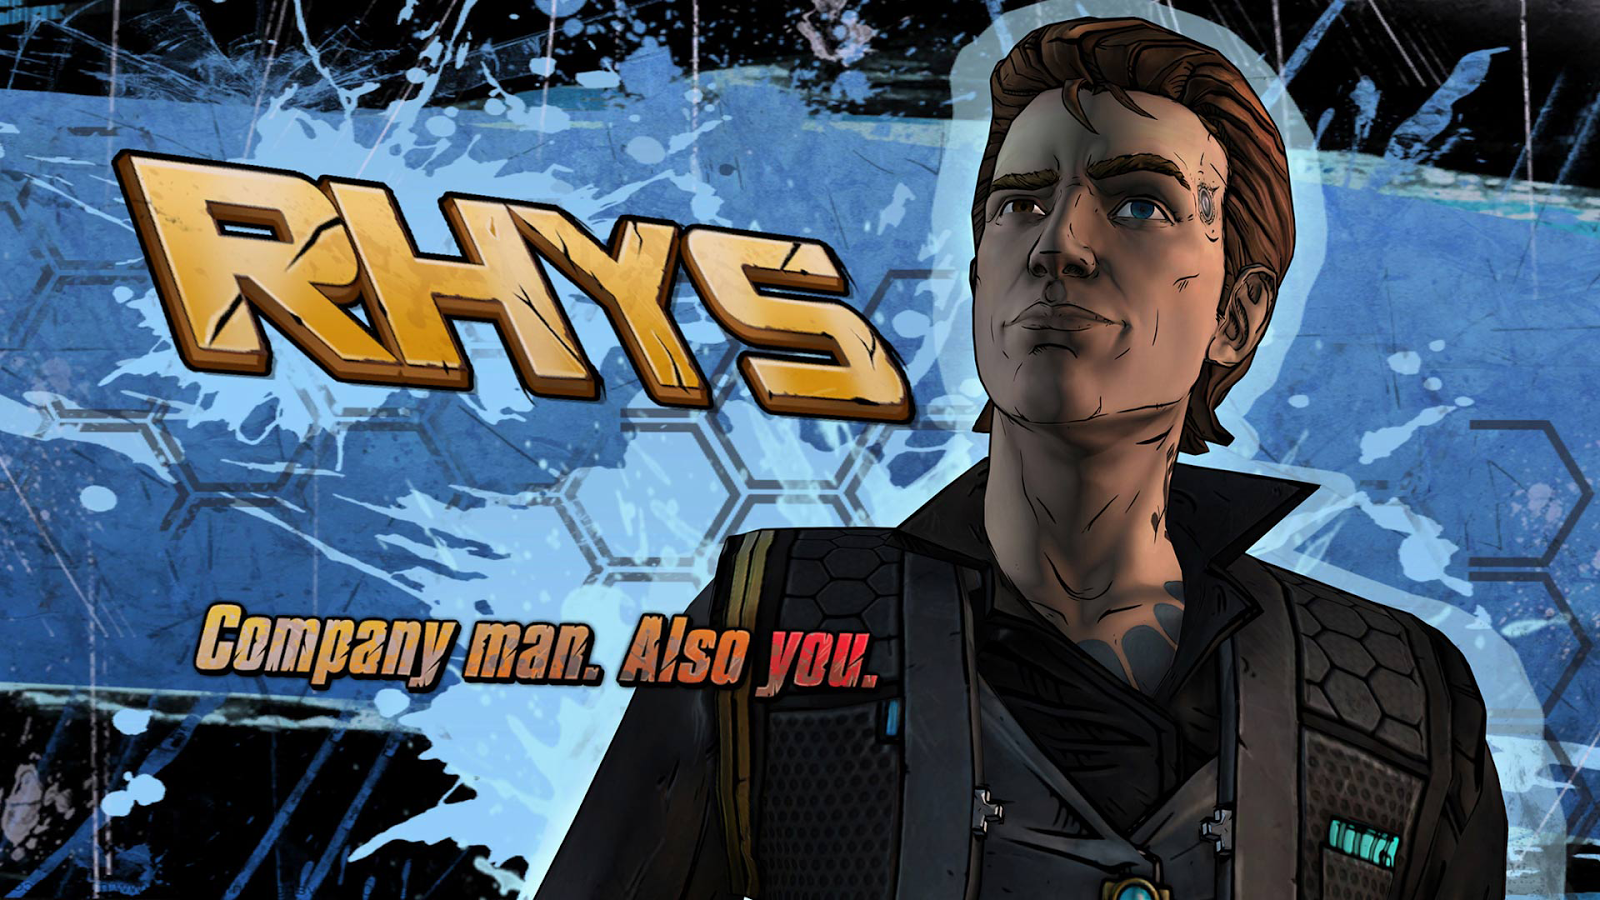    Tales from the Borderlands- screenshot  